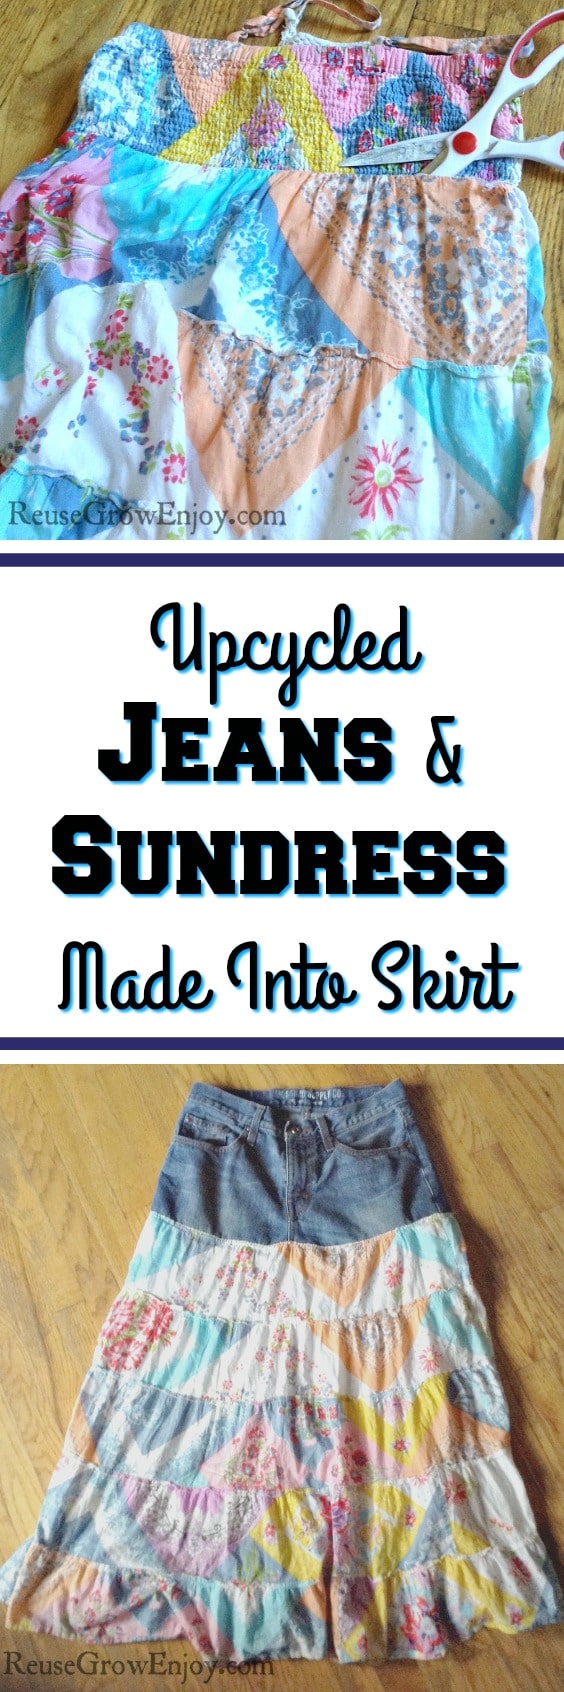 Do your kids have some clothing that they love but are to big to fit anymore? Check out this Upcycled Jeans And Sundress Into Skirt!